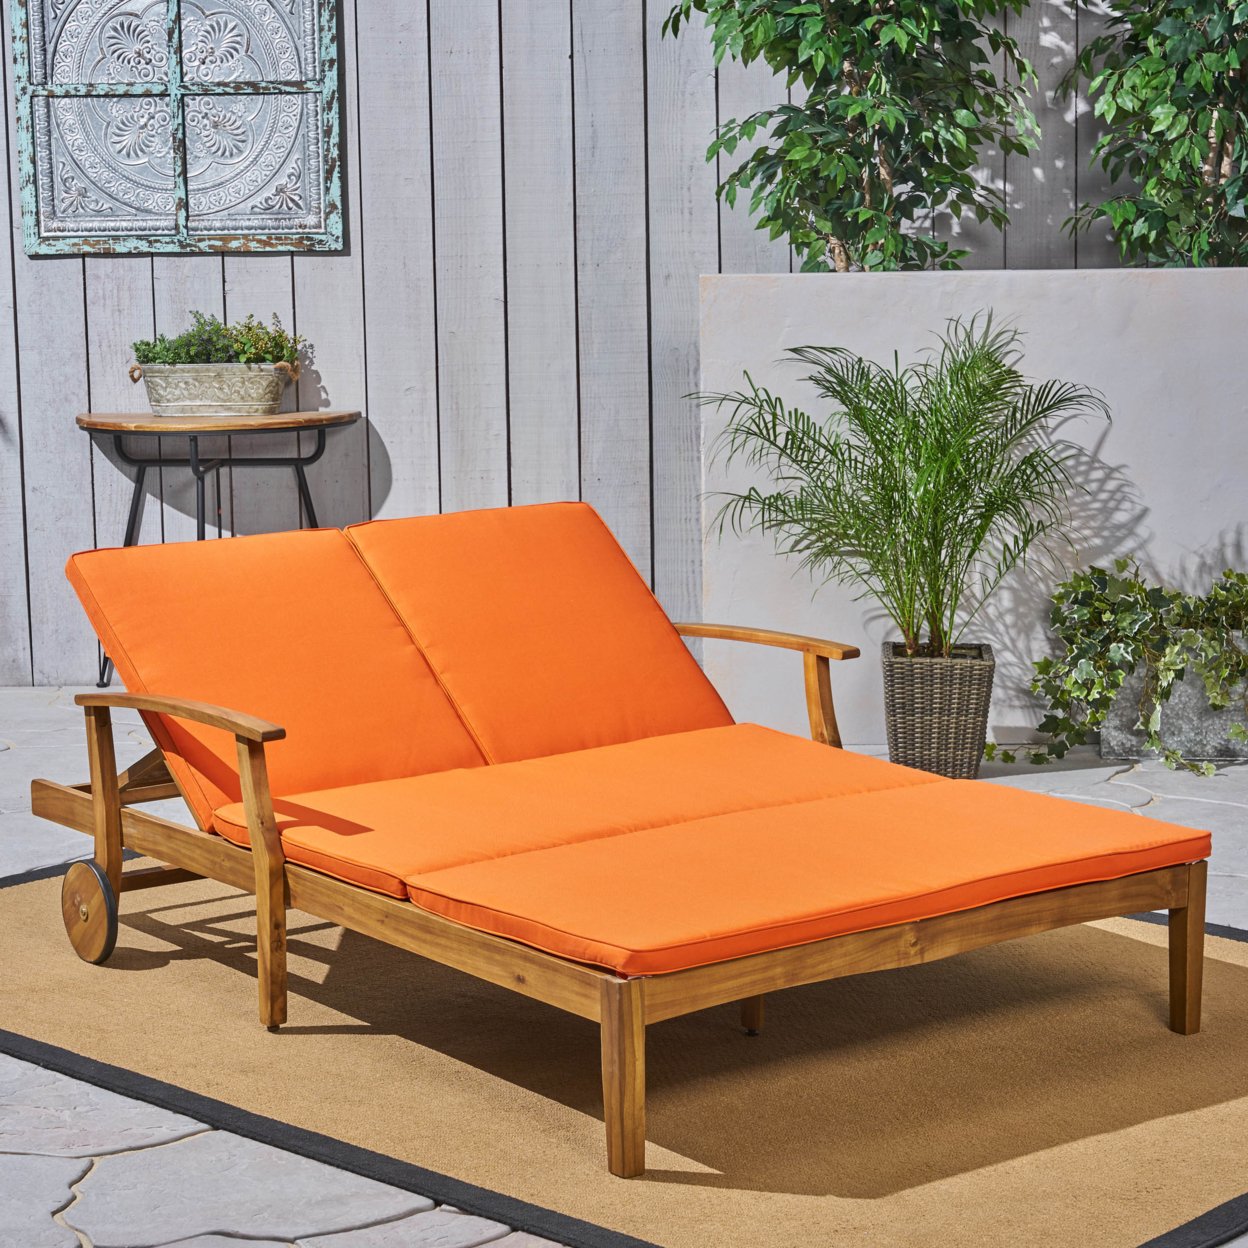 Samantha Double Chaise Lounge For Yard And Patio, Acacia Wood Frame - Orange